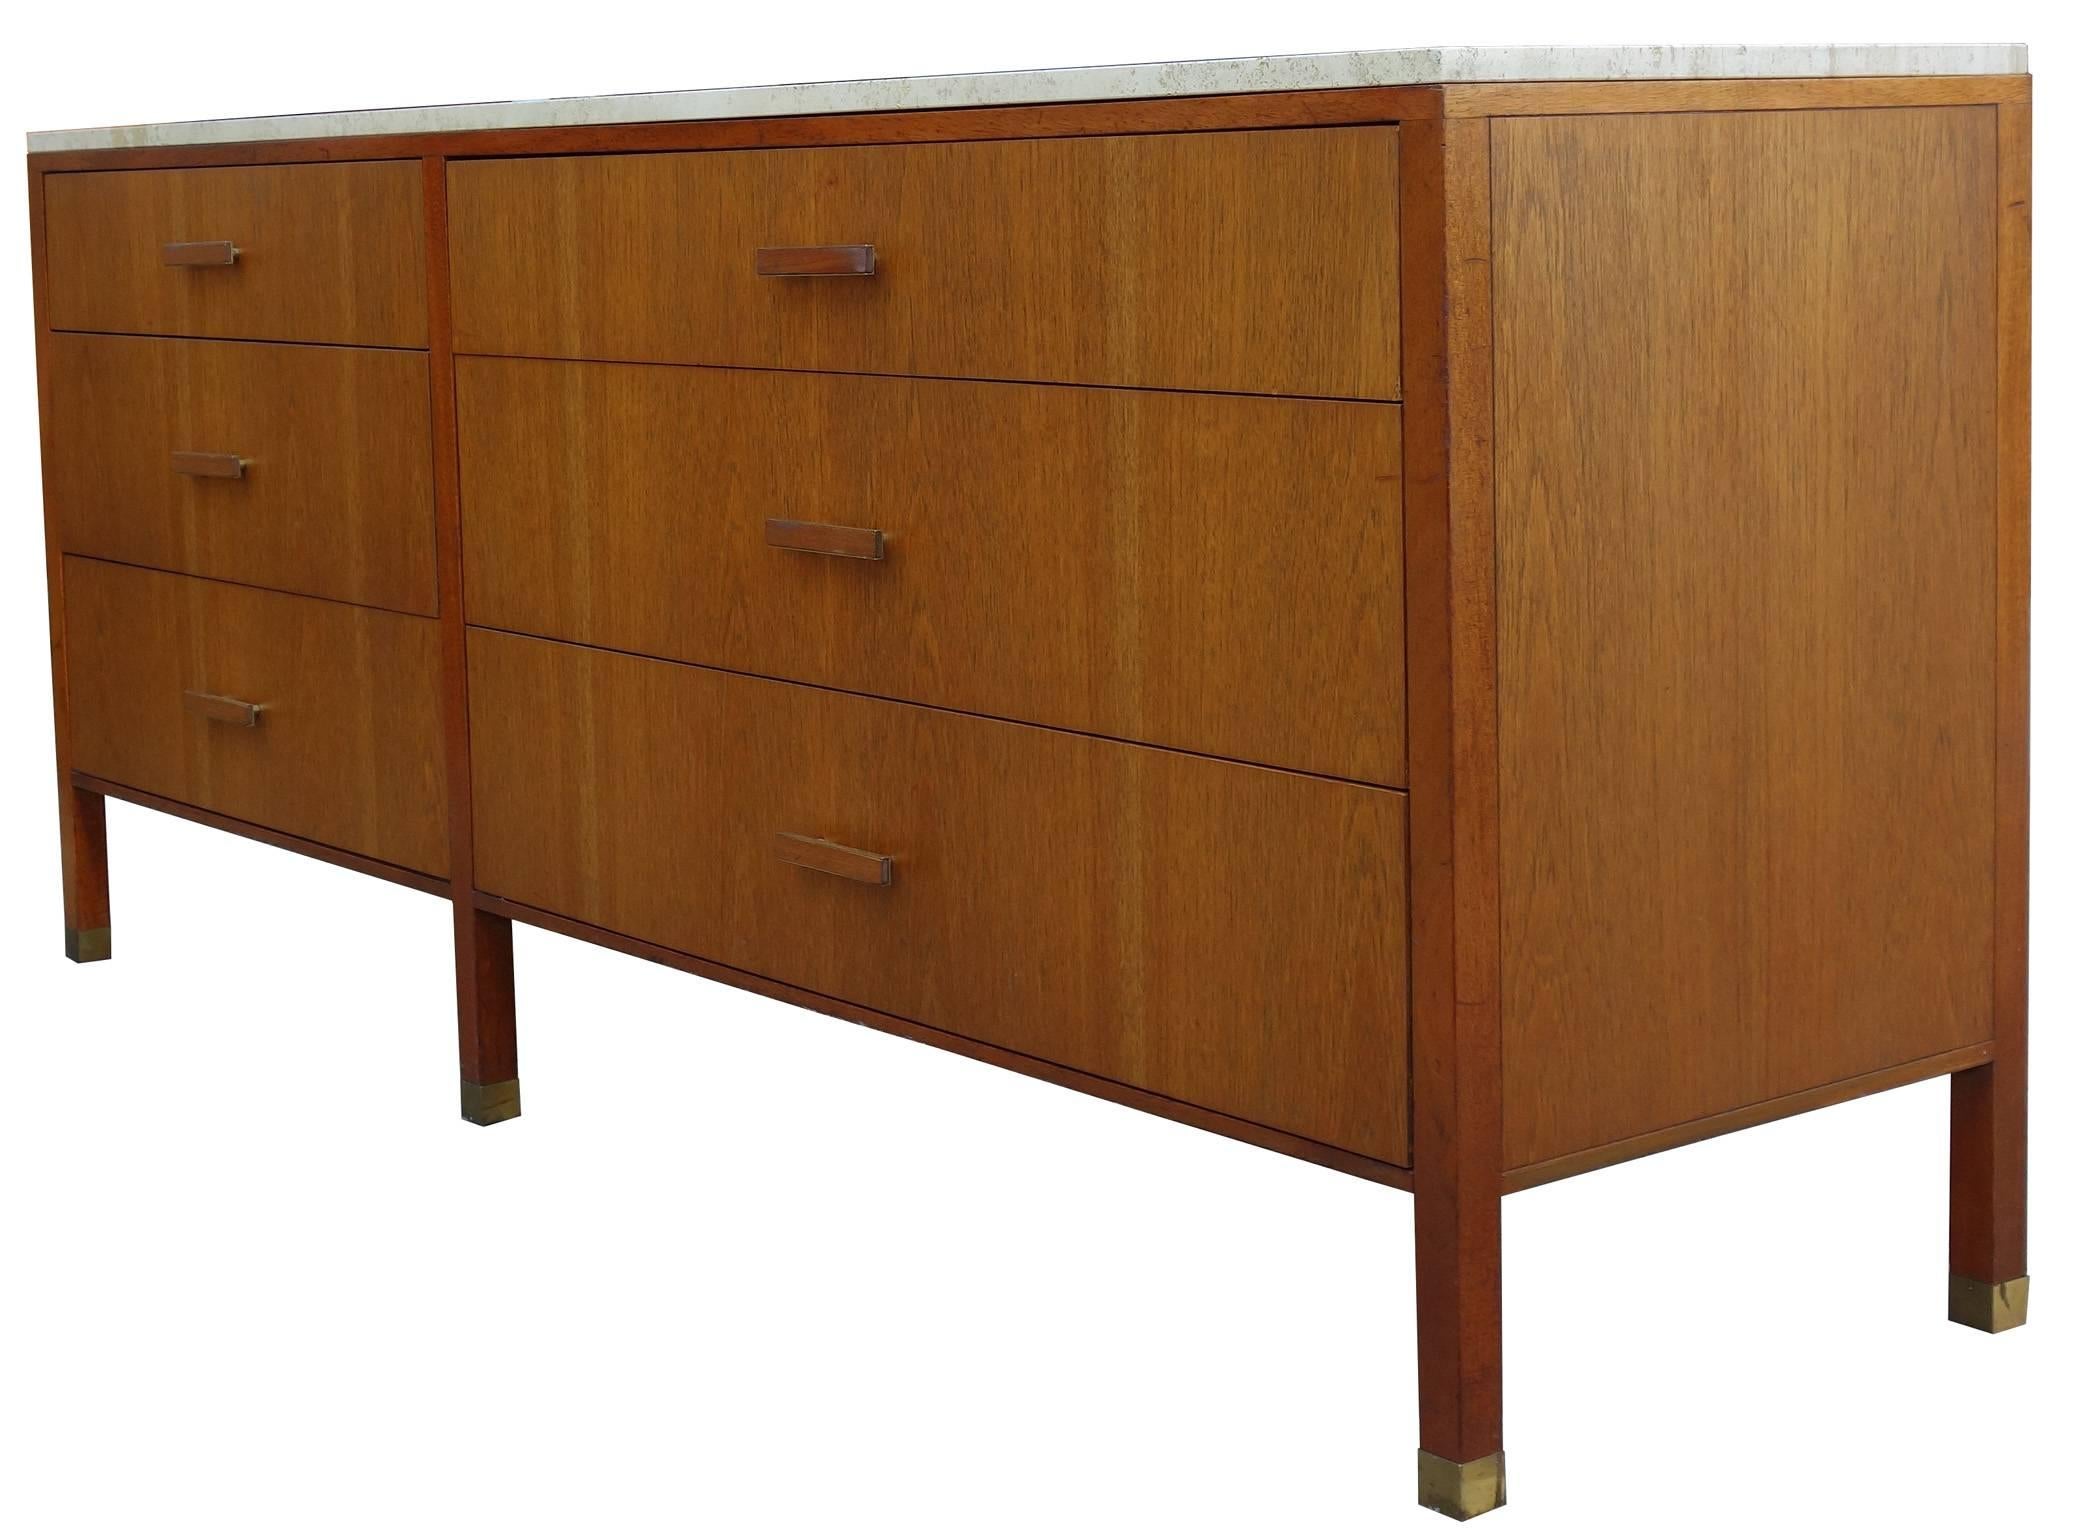 Important Mid-Century Harvey Probber dresser with travertine top and brass details. This piece has a wonderful presence and is finely crafted. 

Just under 6.5' in length.
Original travertine top hand signed by workshop on the underside.
Retains